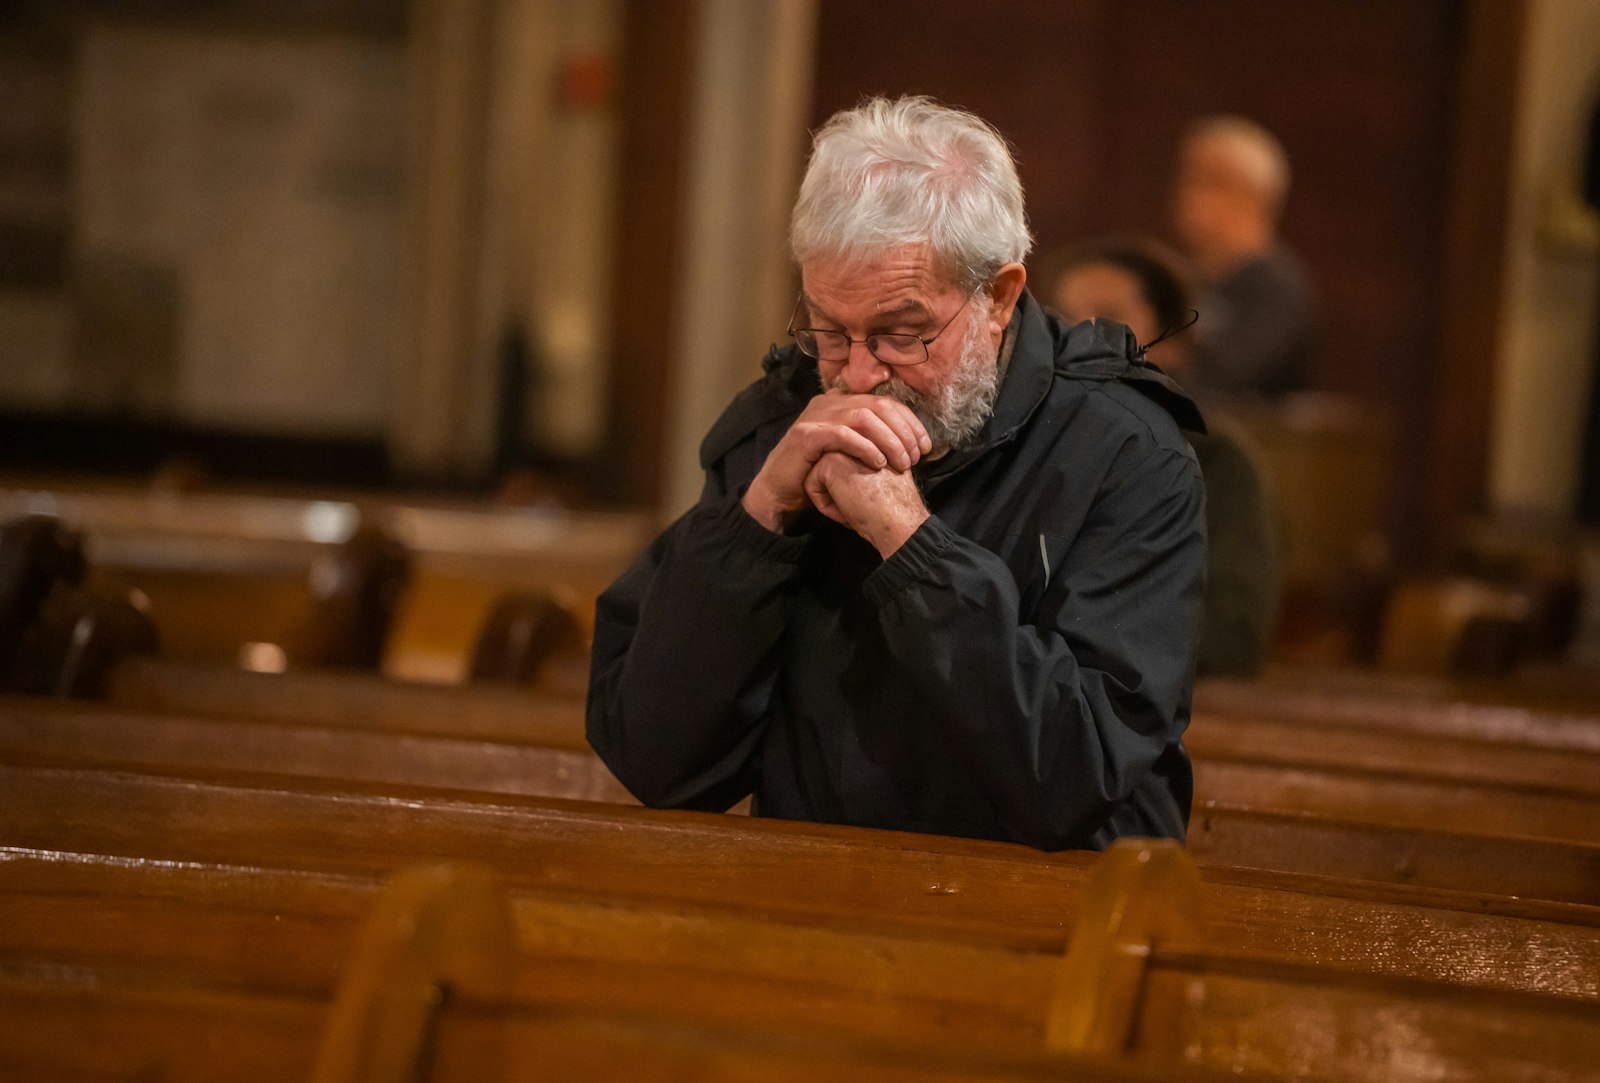 A man kneels in prayer at Old St. Mary's Parish in downtown Detroit's Greektown during an I AM HERE holy hour Dec. 8.